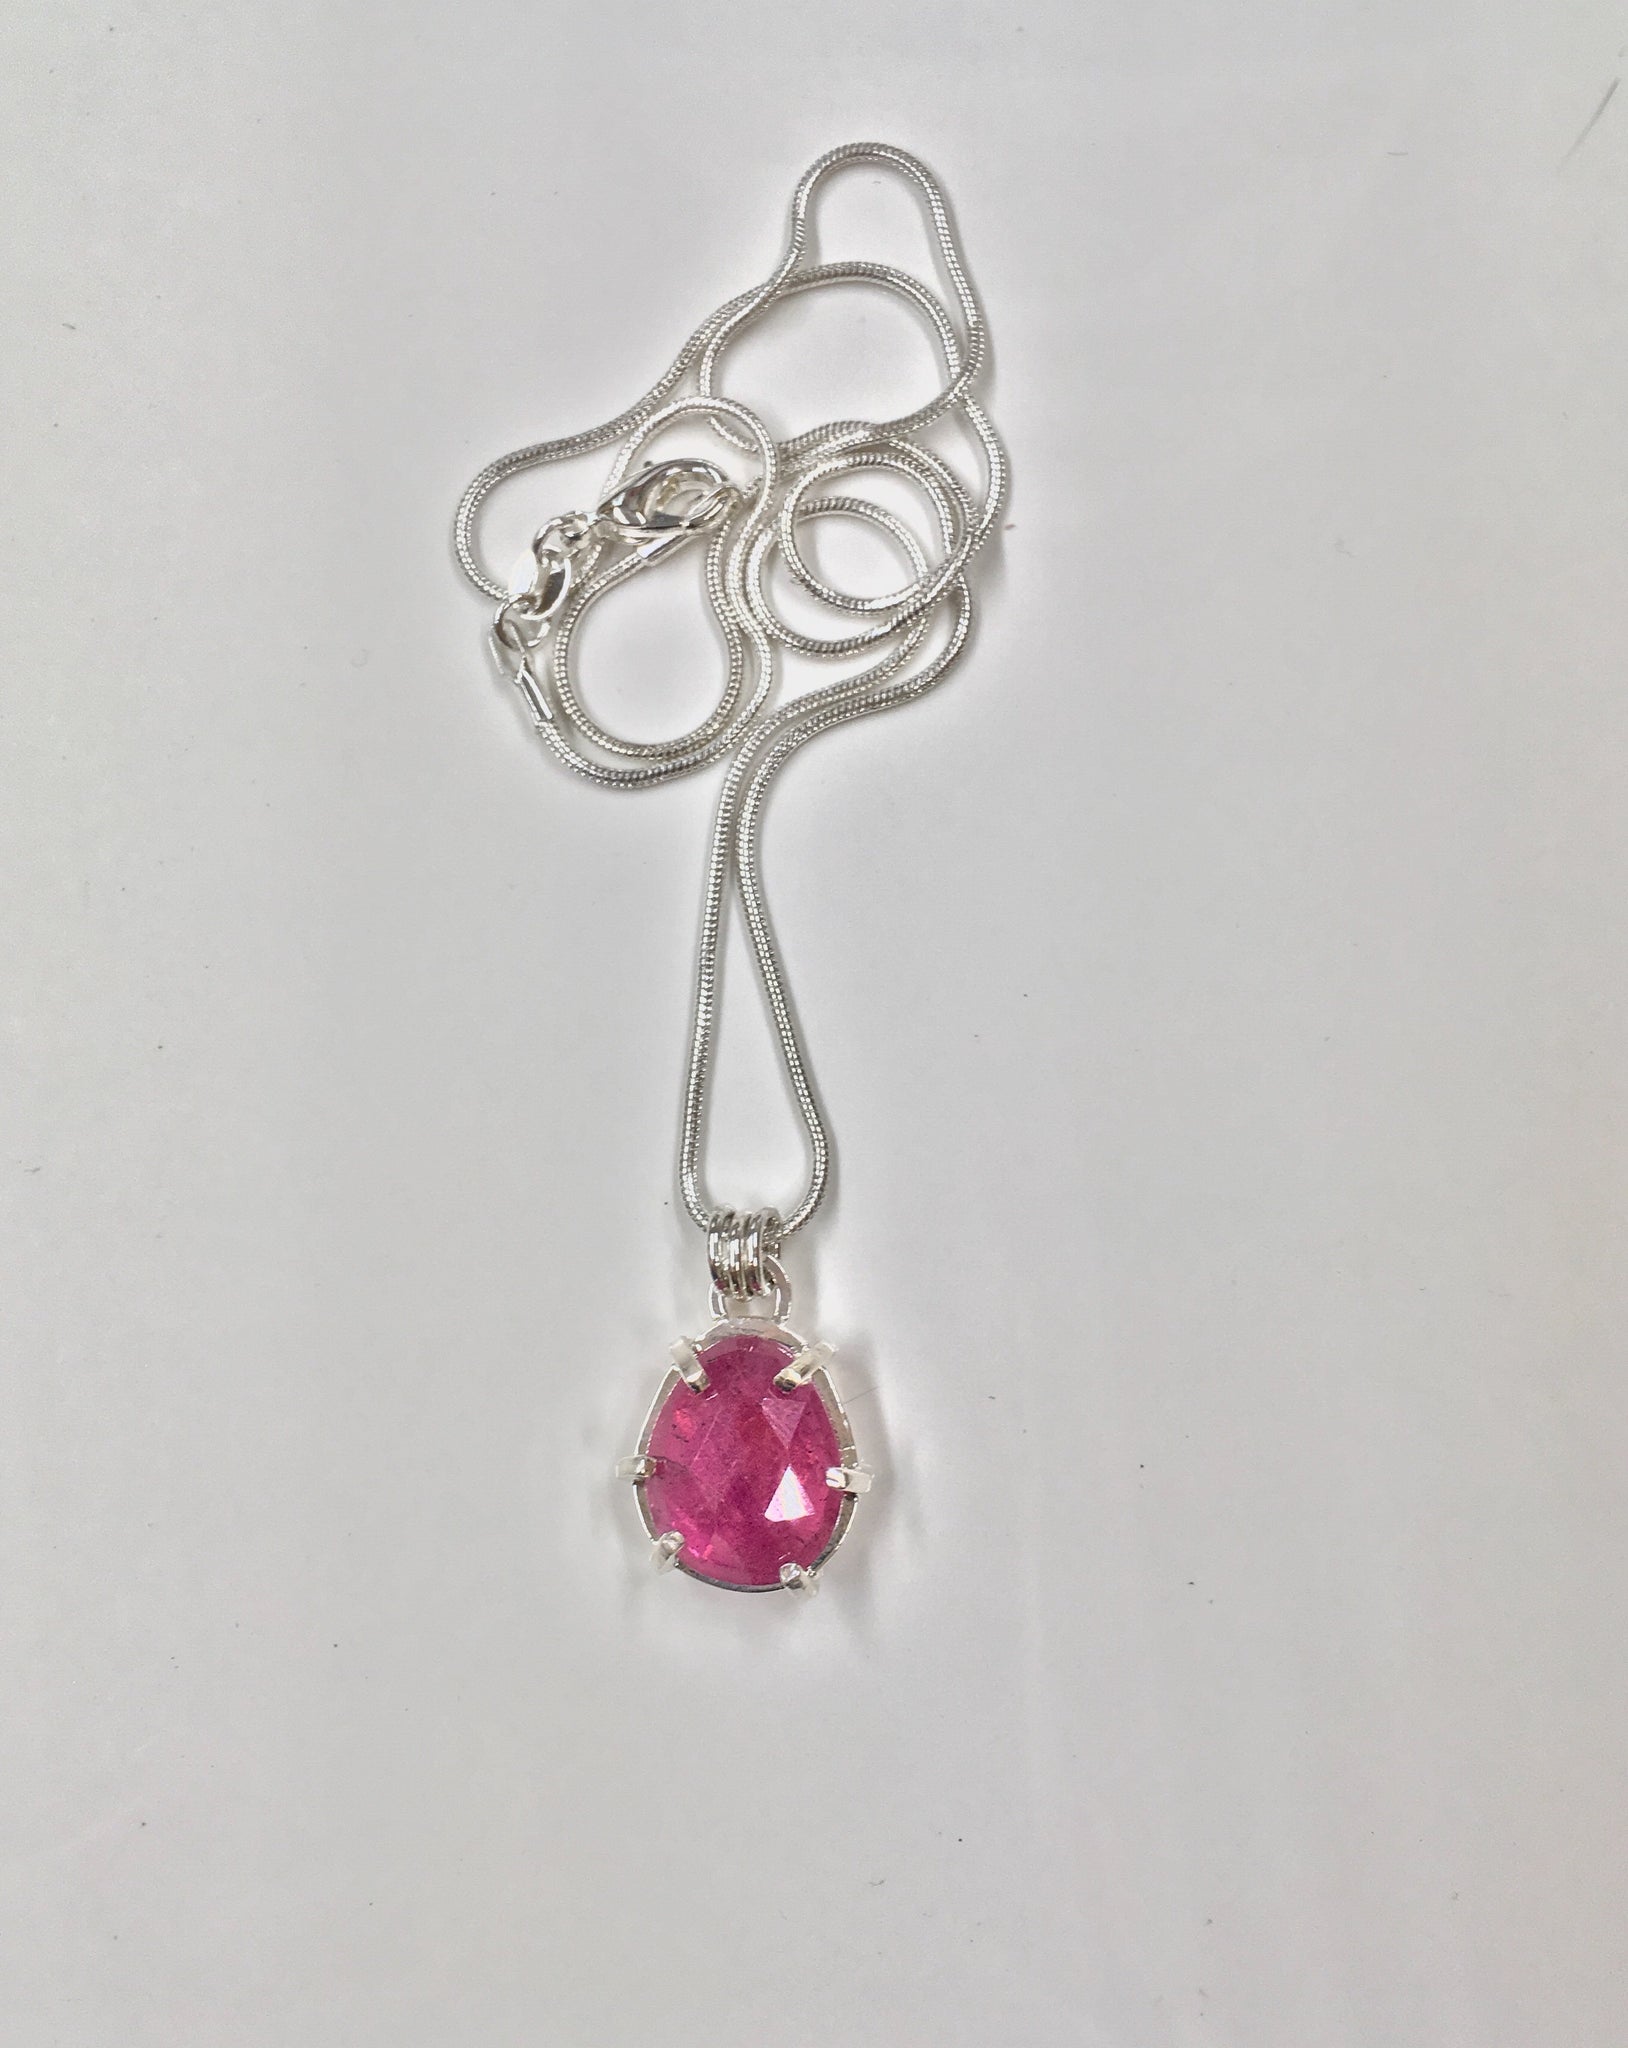 In the Pink.  6.88 carat, rose cut, ruby  SOLD